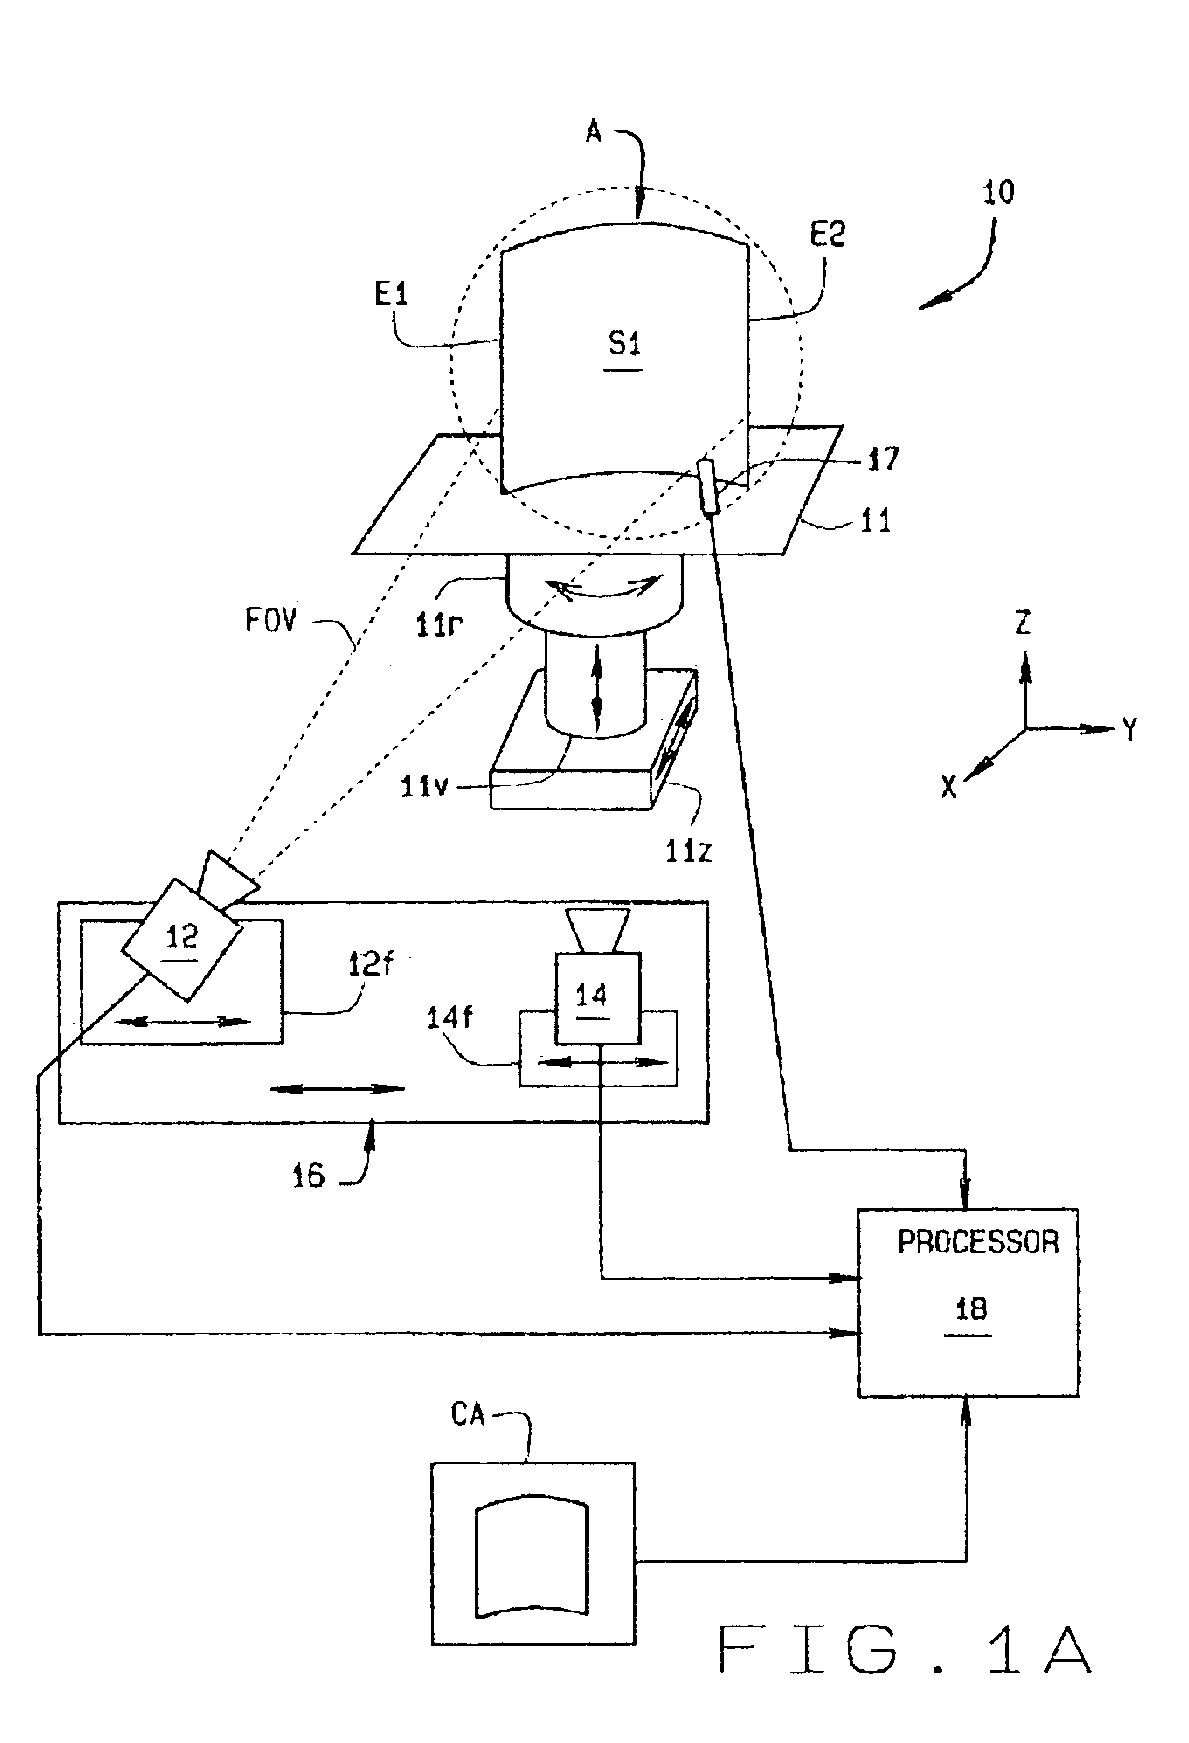 Non-contact measurement system for large airfoils